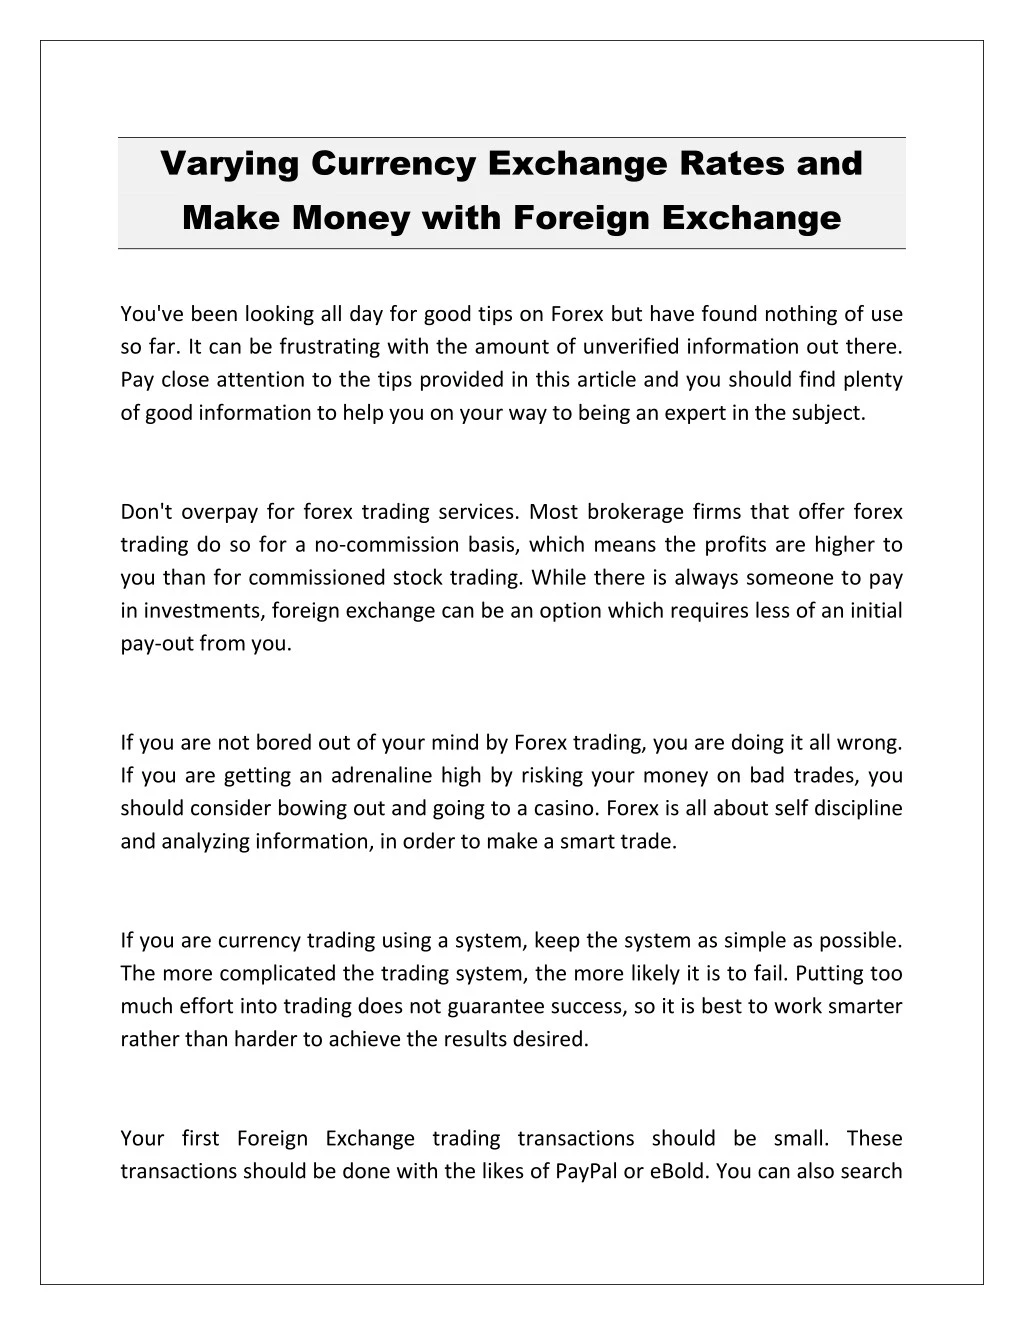 varying currency exchange rates and make money